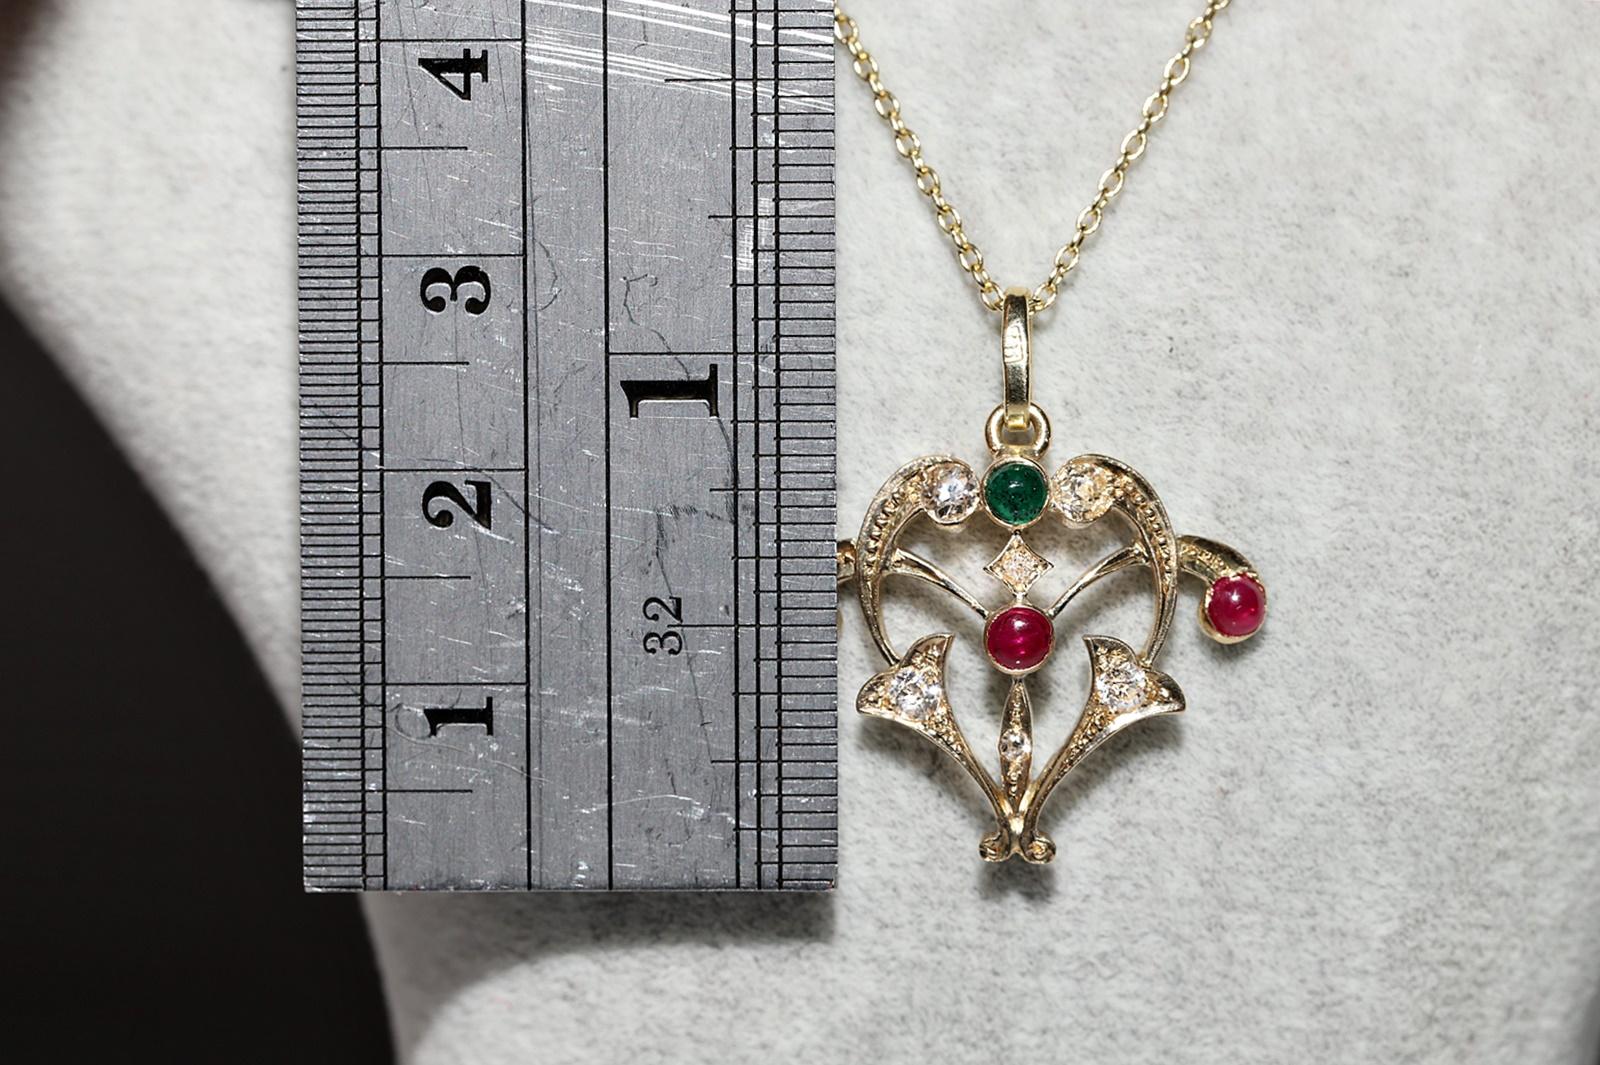 Vintage Circa 1980s 14k Gold Natural Diamond And Emerald Ruby Pendant Necklace In Good Condition For Sale In Fatih/İstanbul, 34